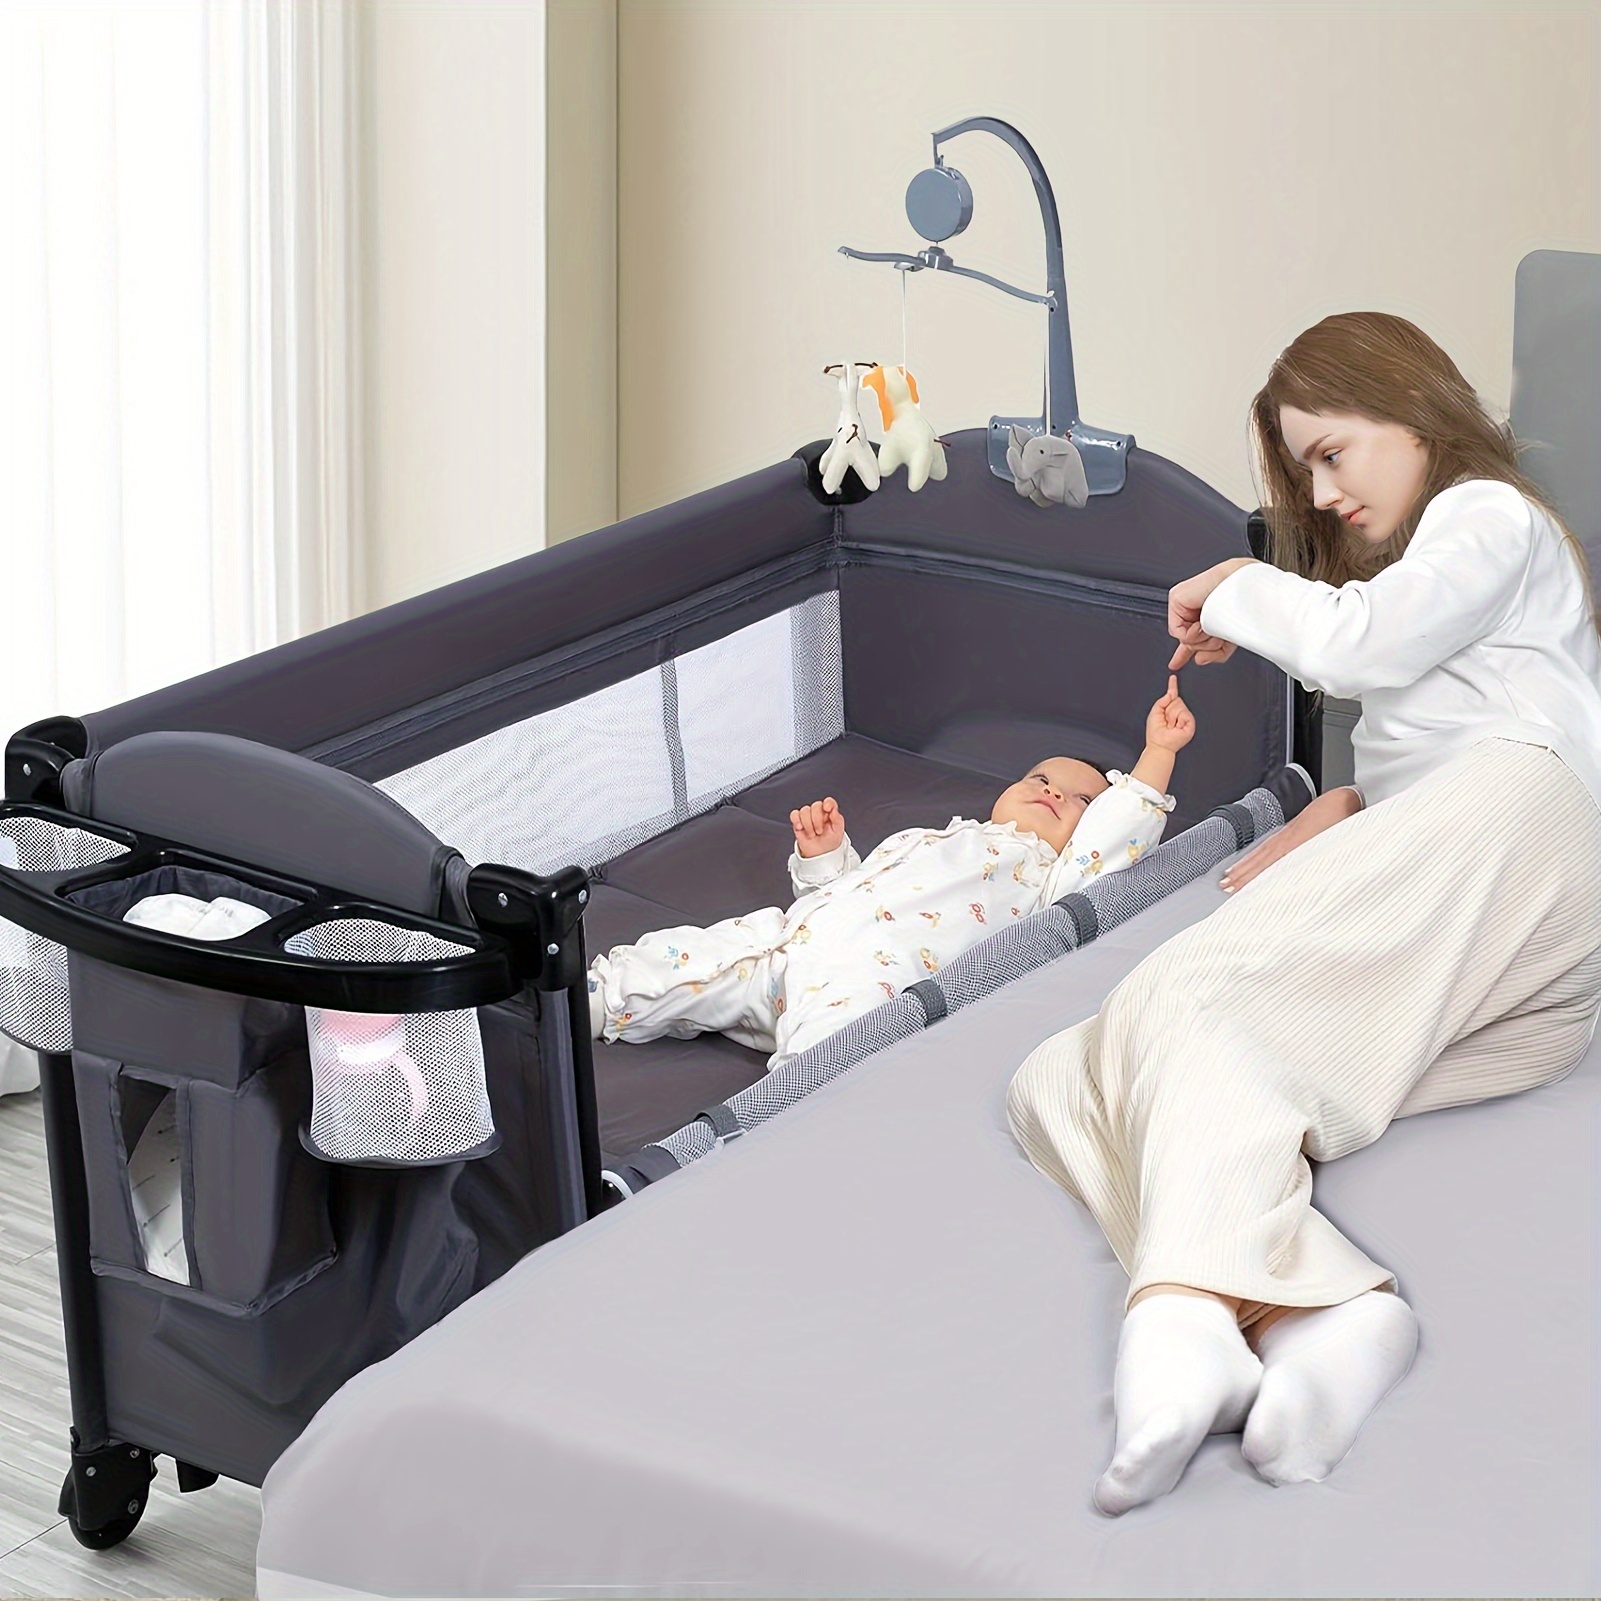 

5 In 1 Bedside Sleeper, With Diaper Changer, Blackout Cover, Mattress, Music, Bedside With Storage, Playard Christmas Gift